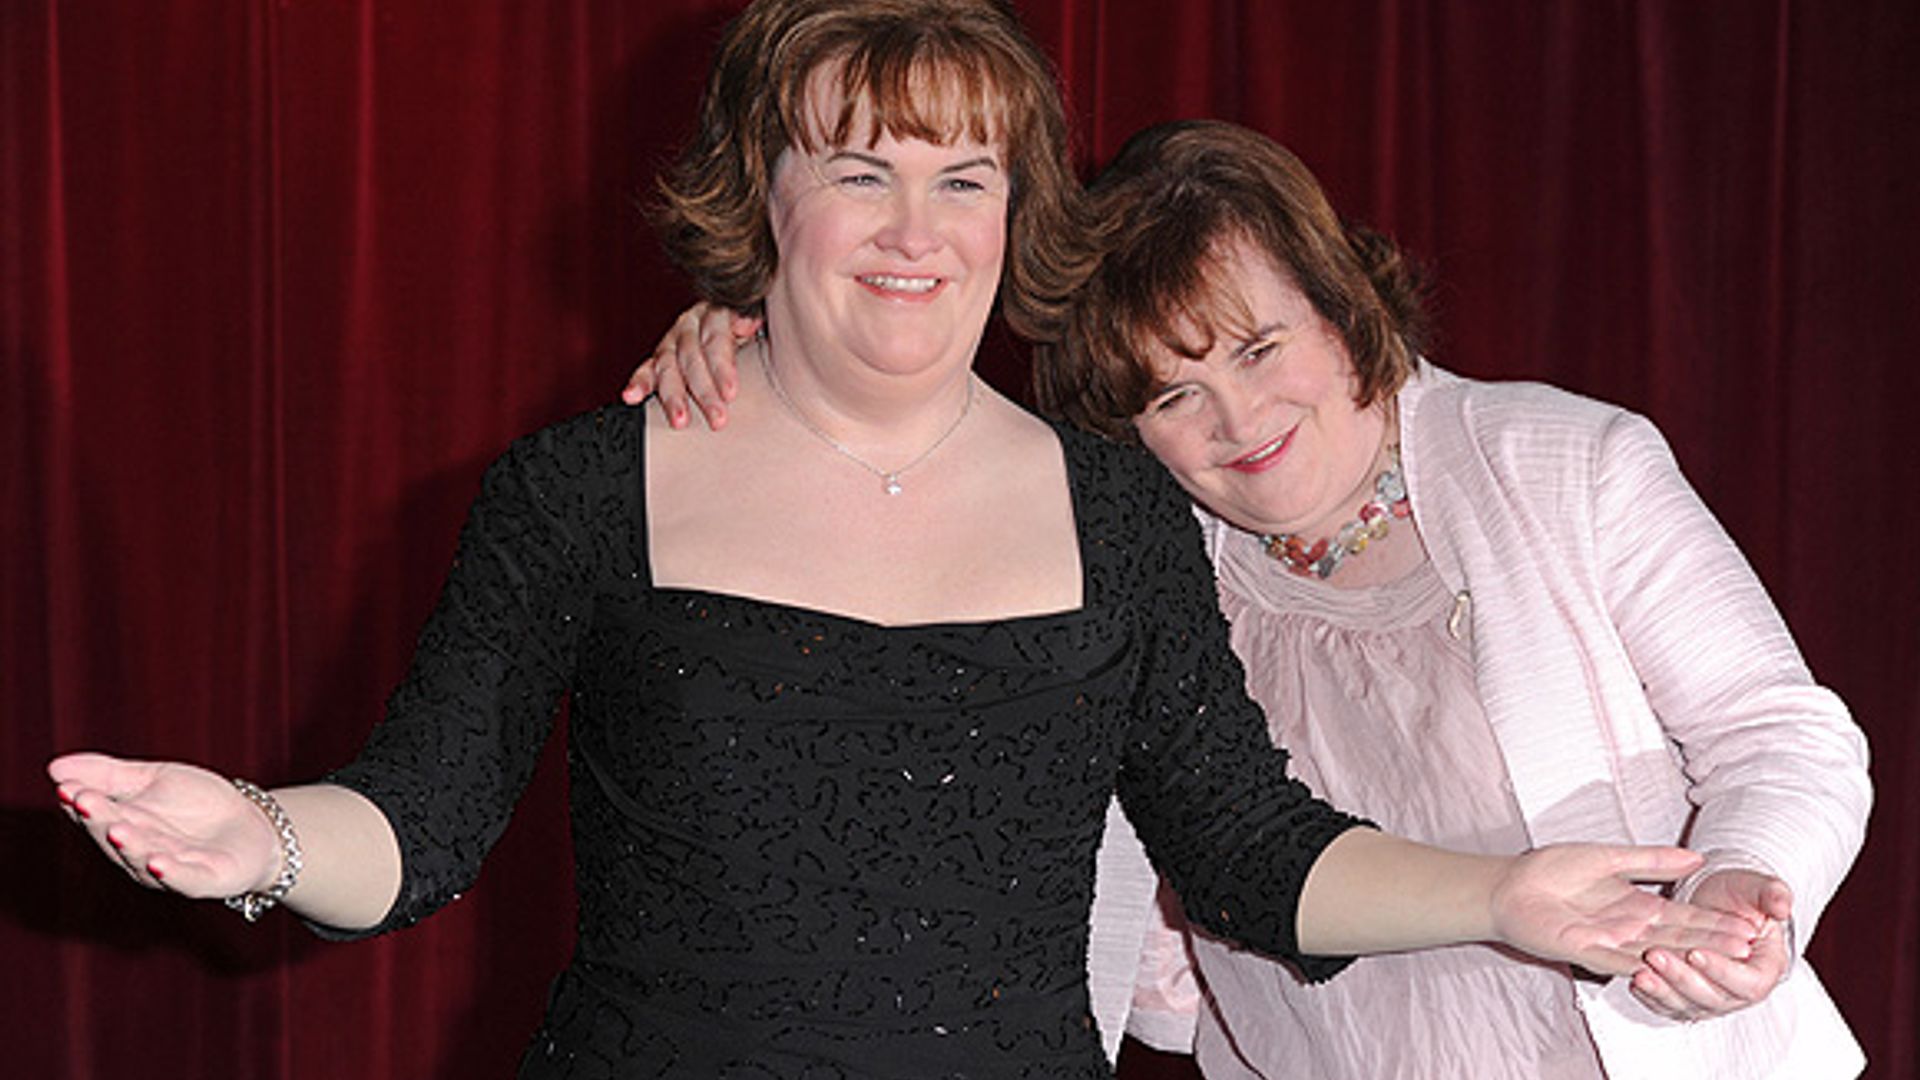 Double the fun: Susan Boyle unveils new waxwork of herself